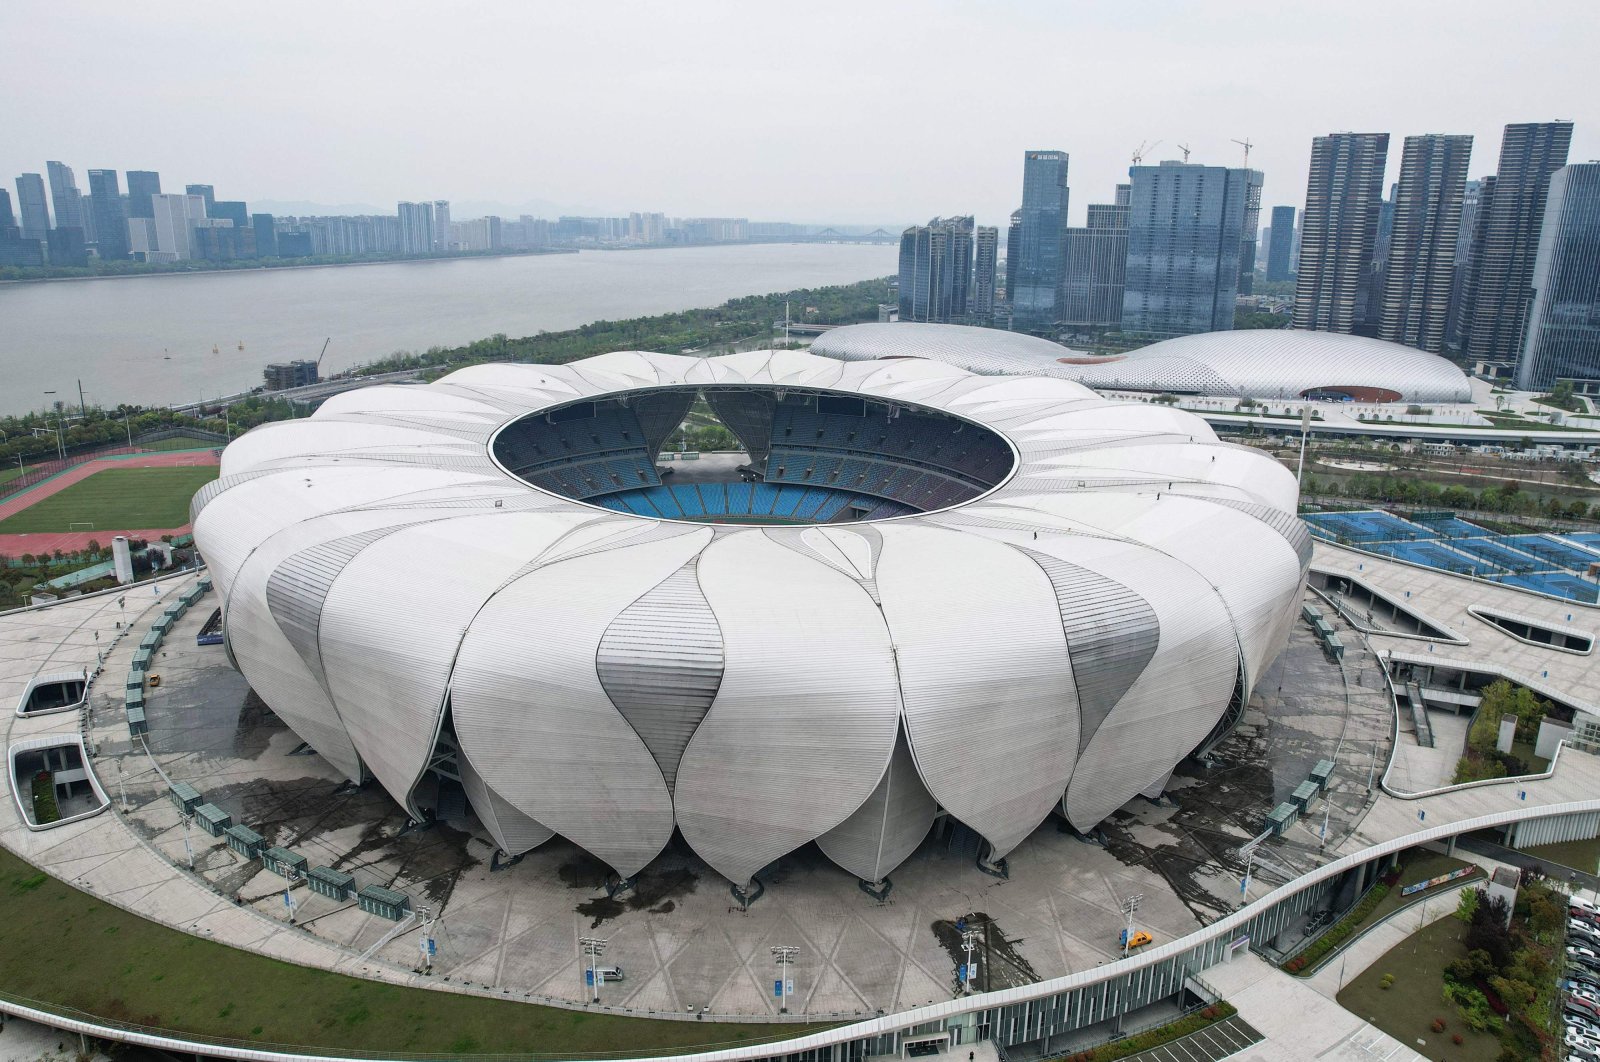 A view of Hangzhou Olympic Sports Center, the main stadium of the 19th Asian Games, in Hangzhou, China, April 1, 2022. (AFP Photo)